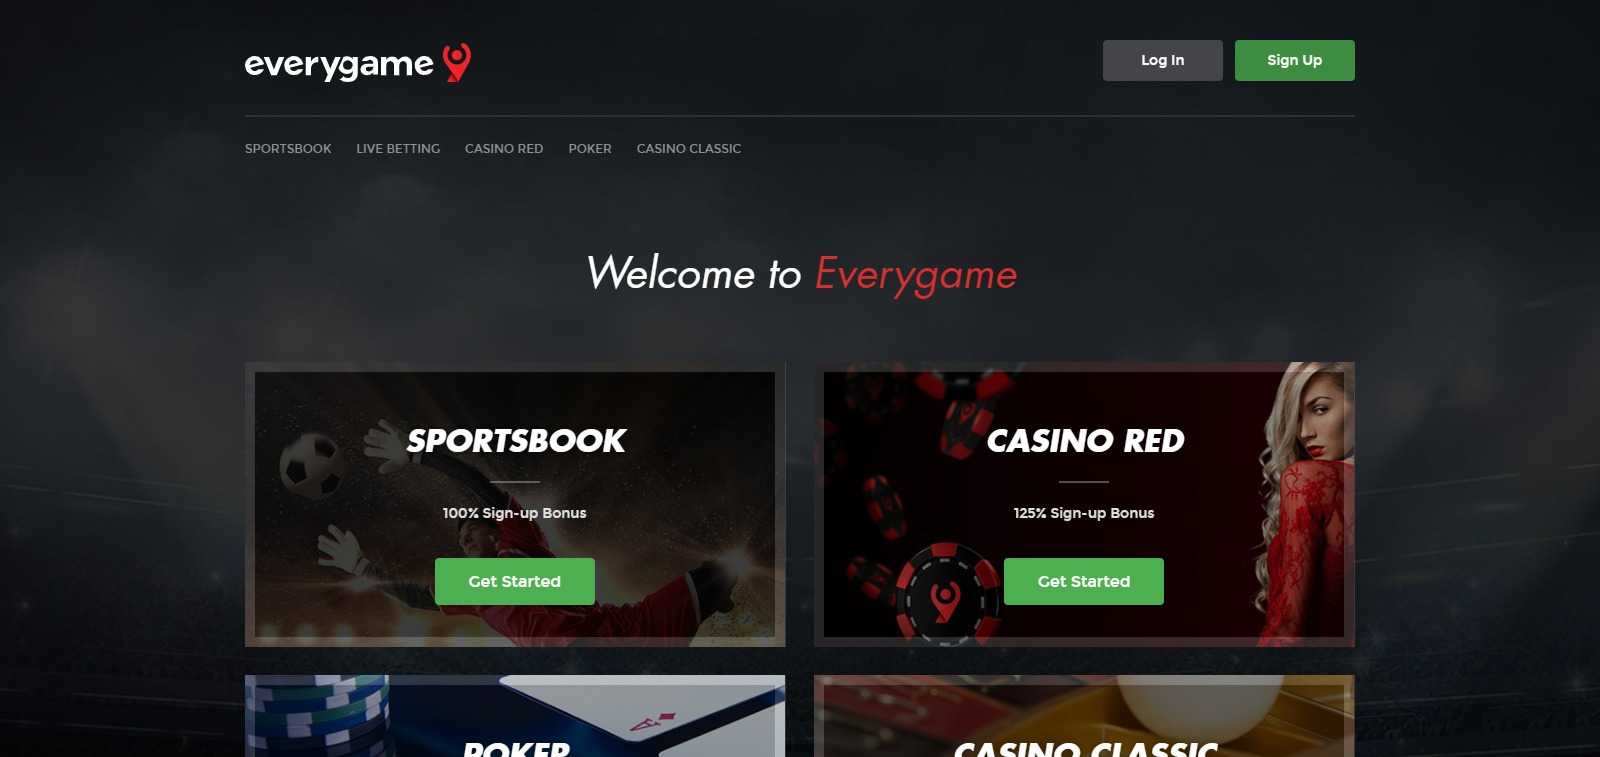 Everygame Affiliates Program Review: Get Earn Up to 35% Recurring revenue share